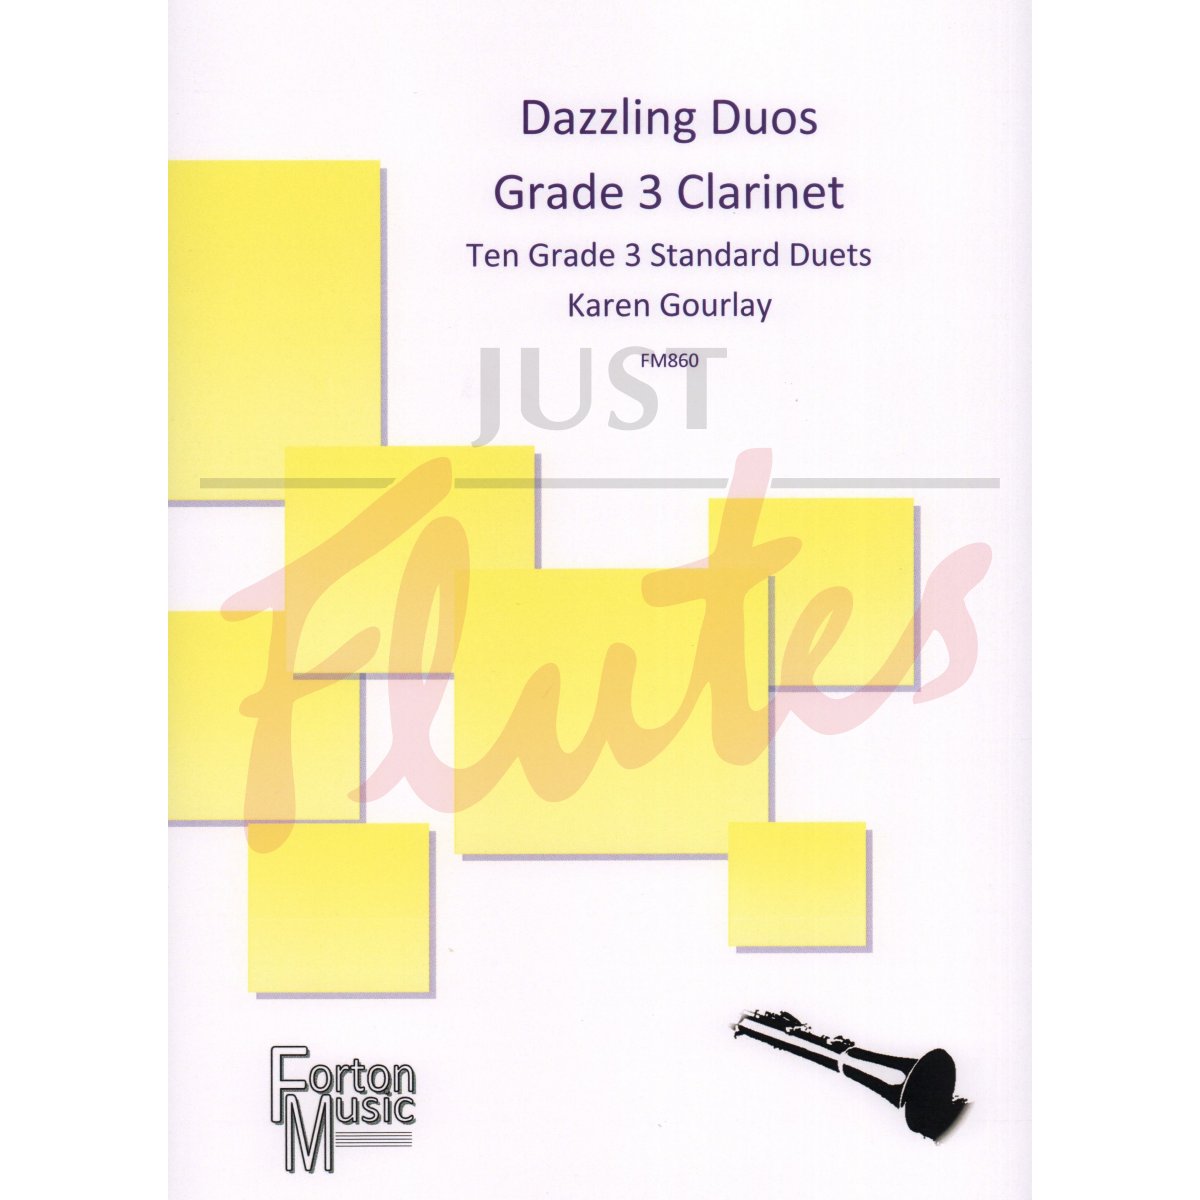 Dazzling Duos for Clarinet - Grade 3